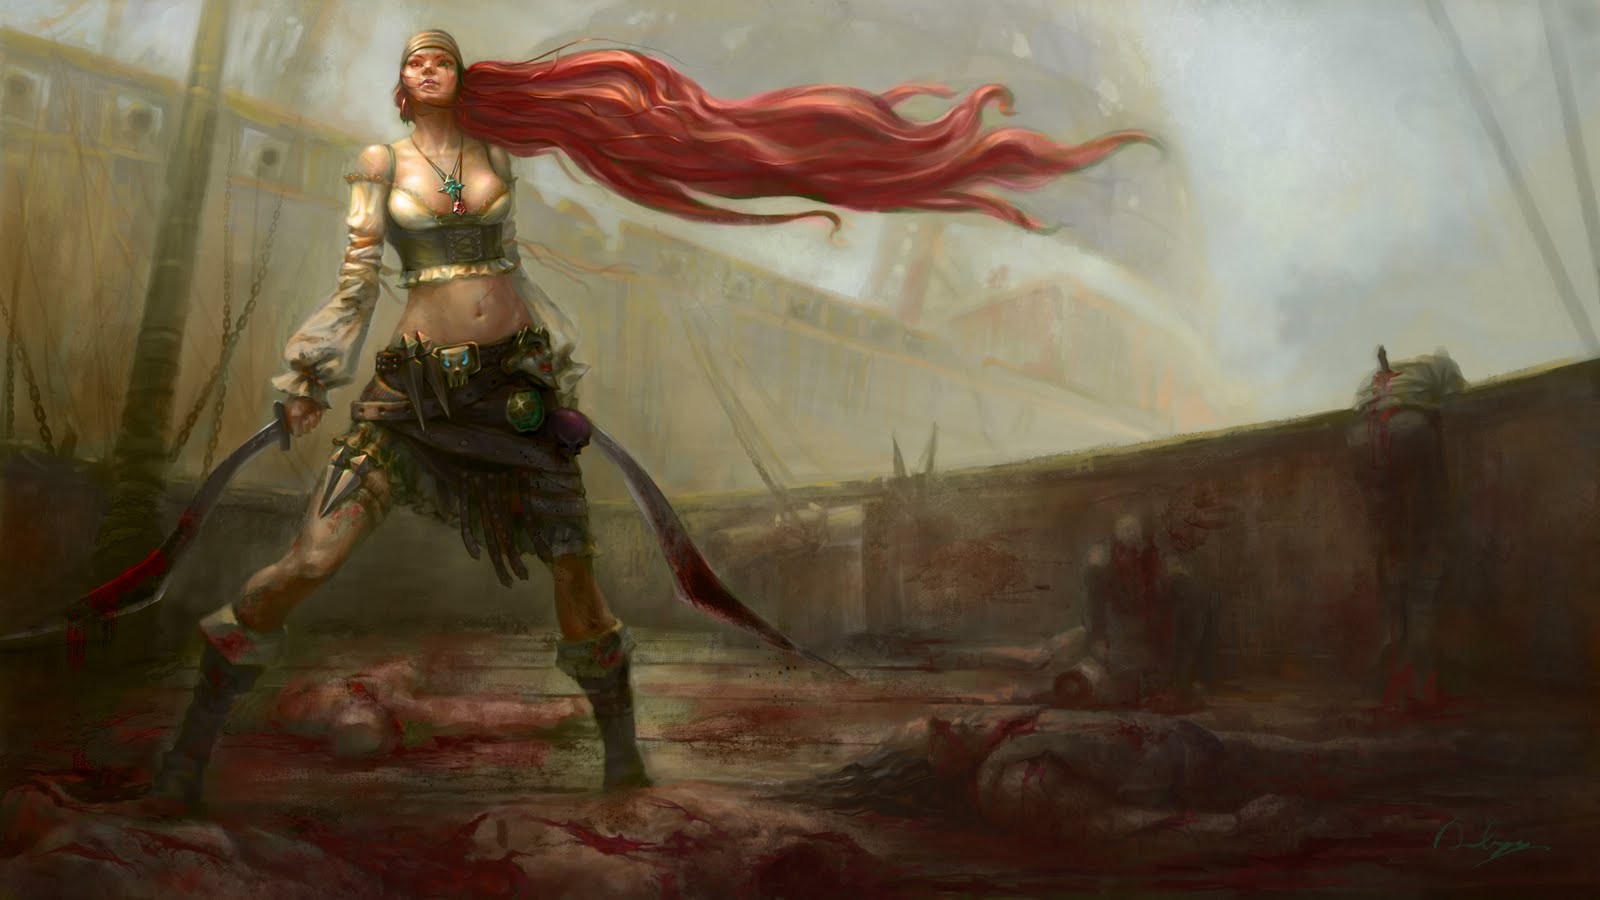 General 1600x900 fantasy girl blood necklace redhead long hair PC gaming belly weapon fantasy art video game warriors Janissa the Widowmaker video game art video game girls boobs standing women with swords sword League of Legends Katarina (League of Legends)